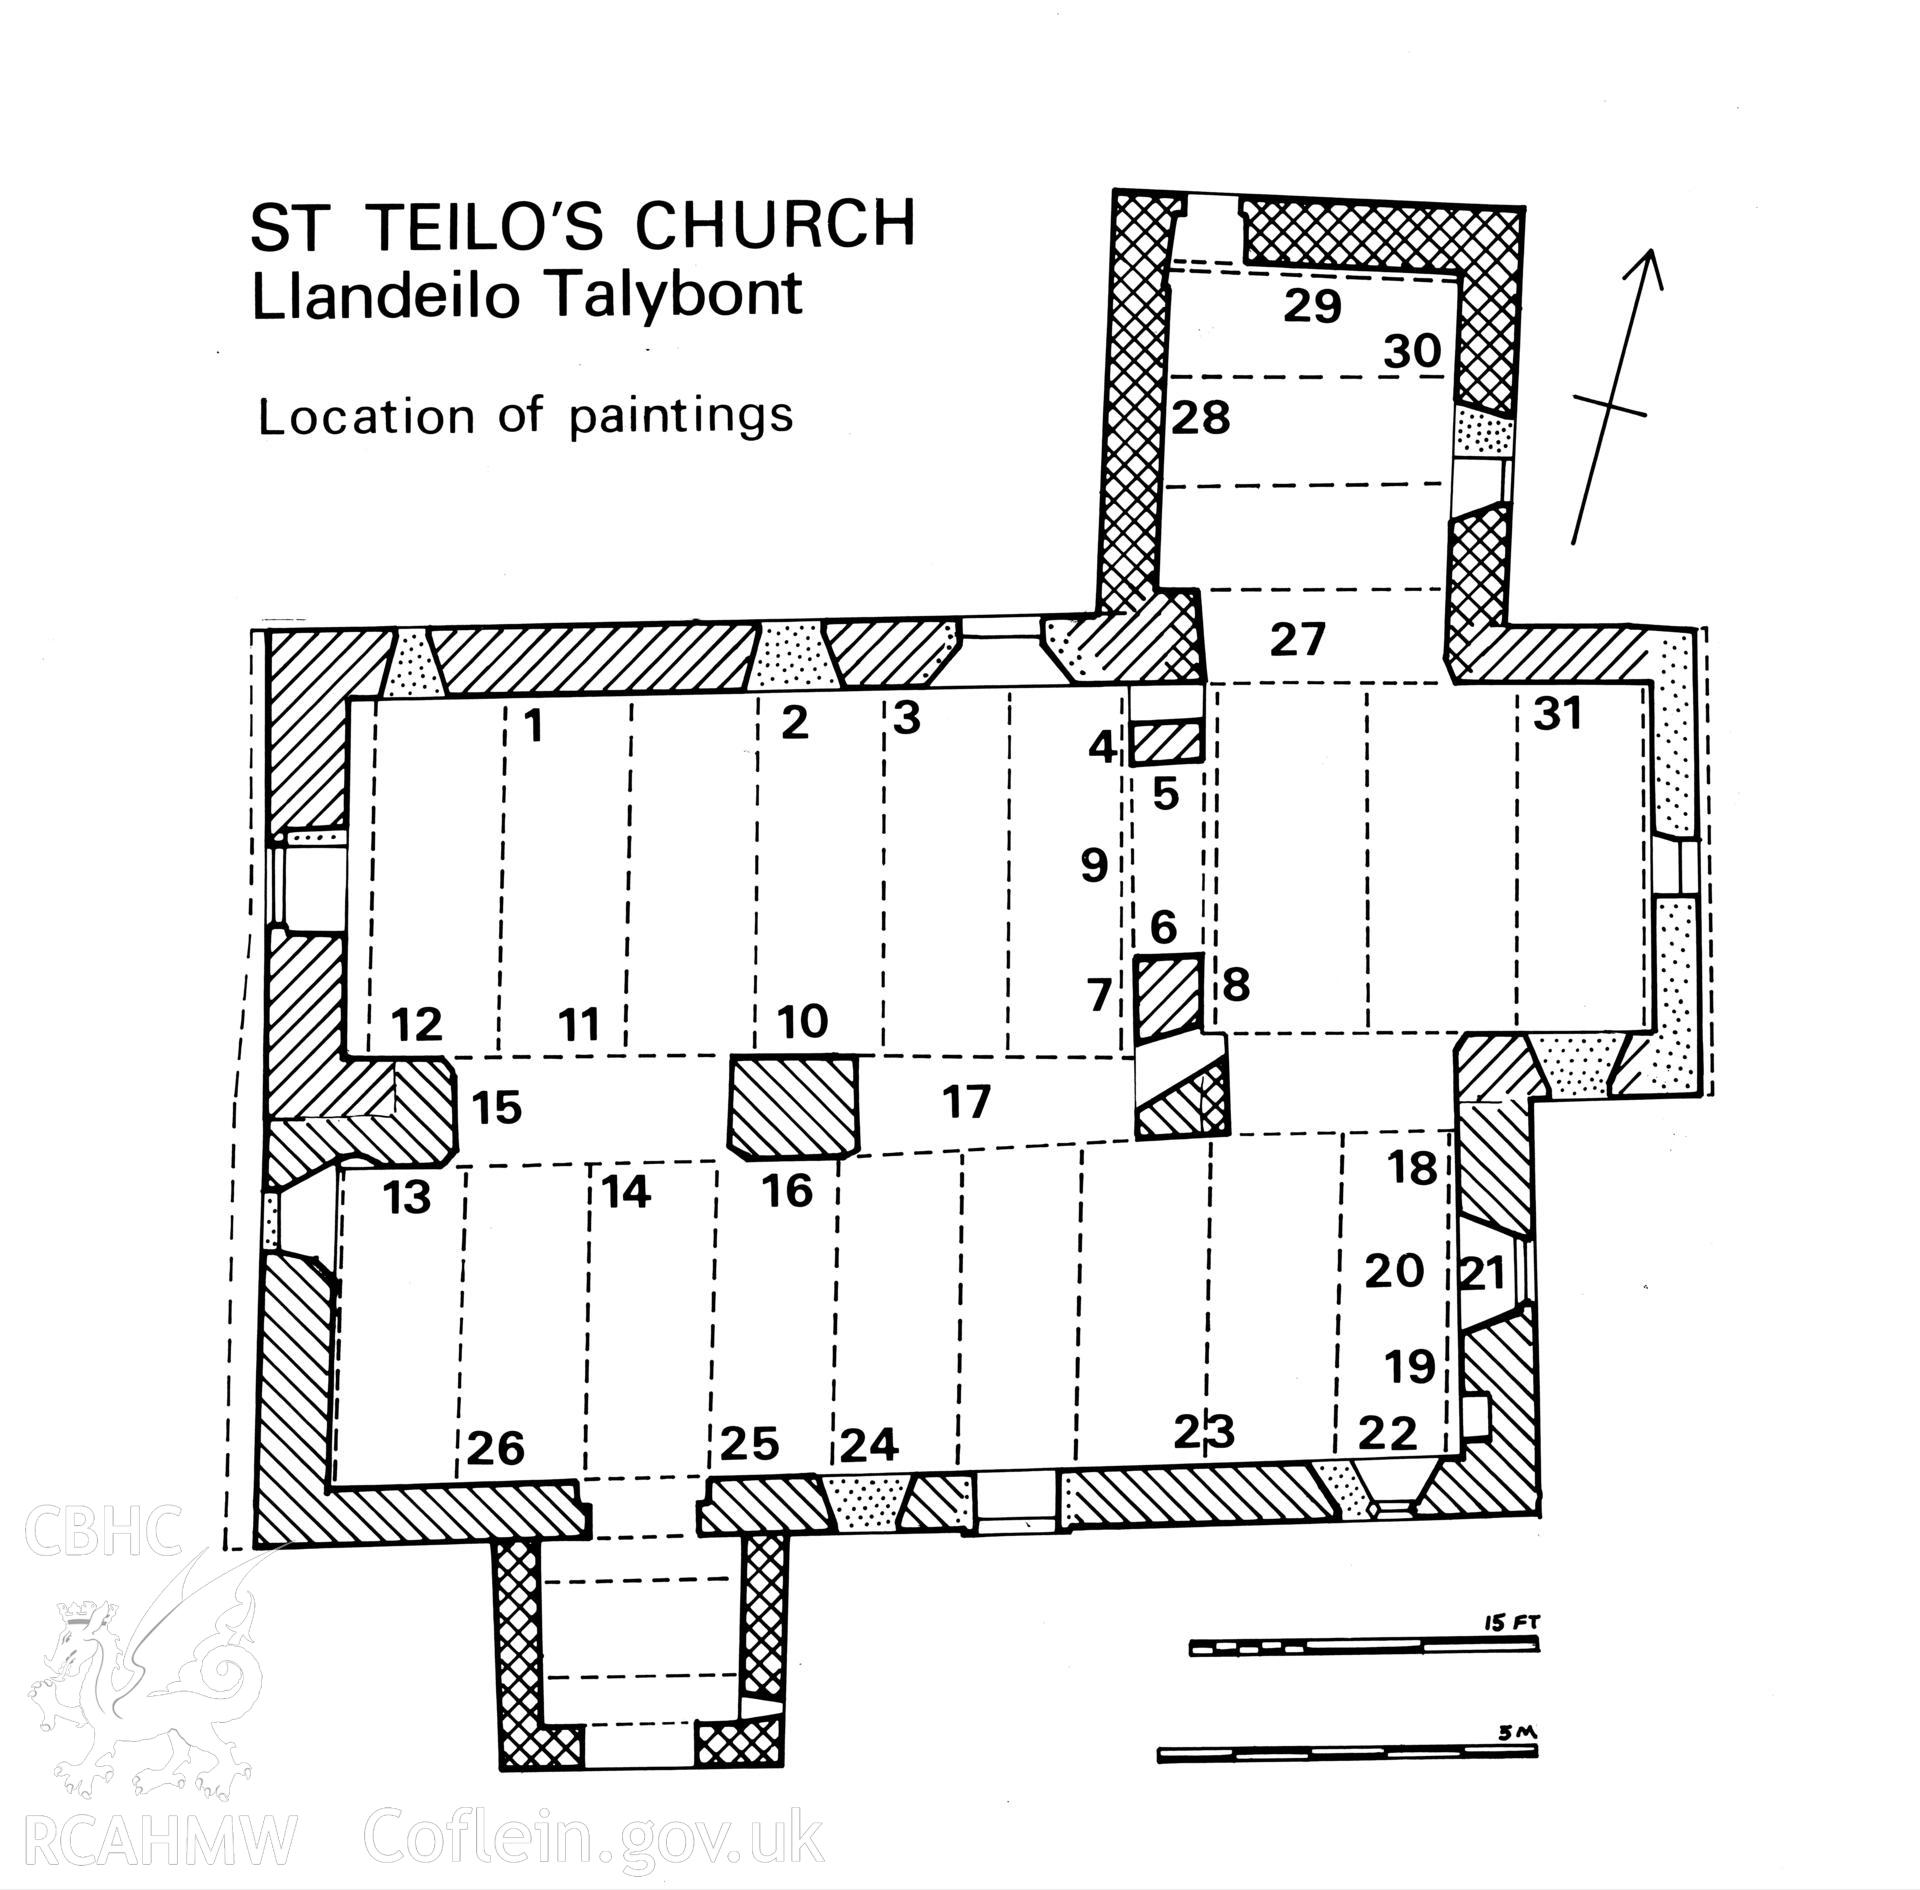 Measured plan of St Teilo's Church, Llandeilo Talybont, overlaid with a key showing the location of paintings within the church, produced by RCAHMW, undated.